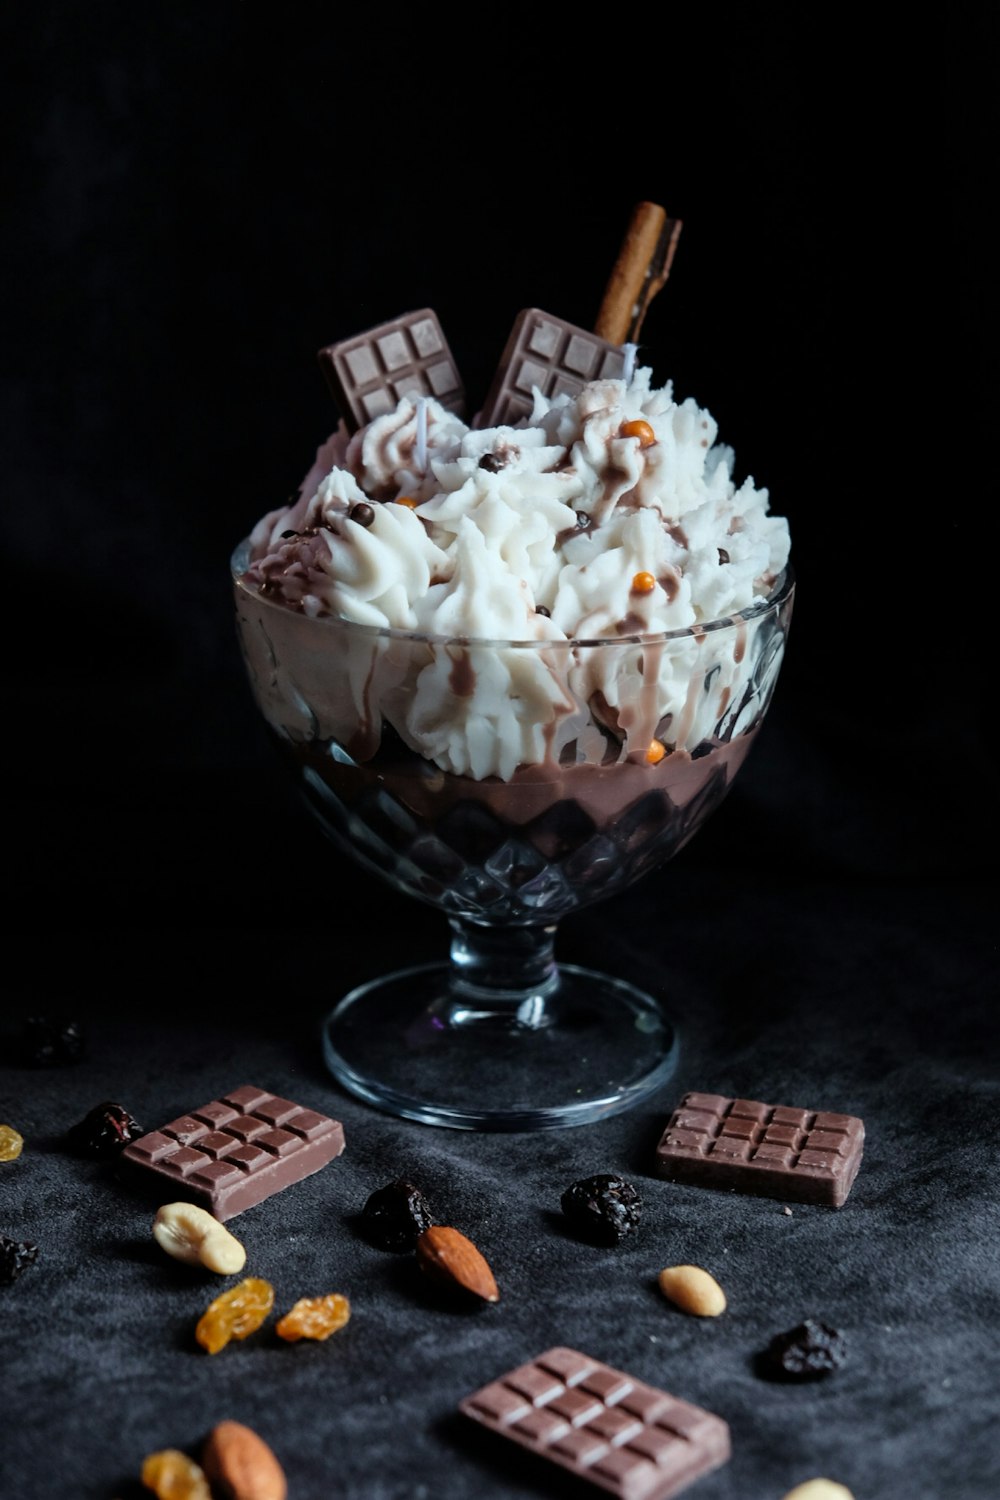 a dessert in a glass bowl with chocolate, nuts, and whipped cream